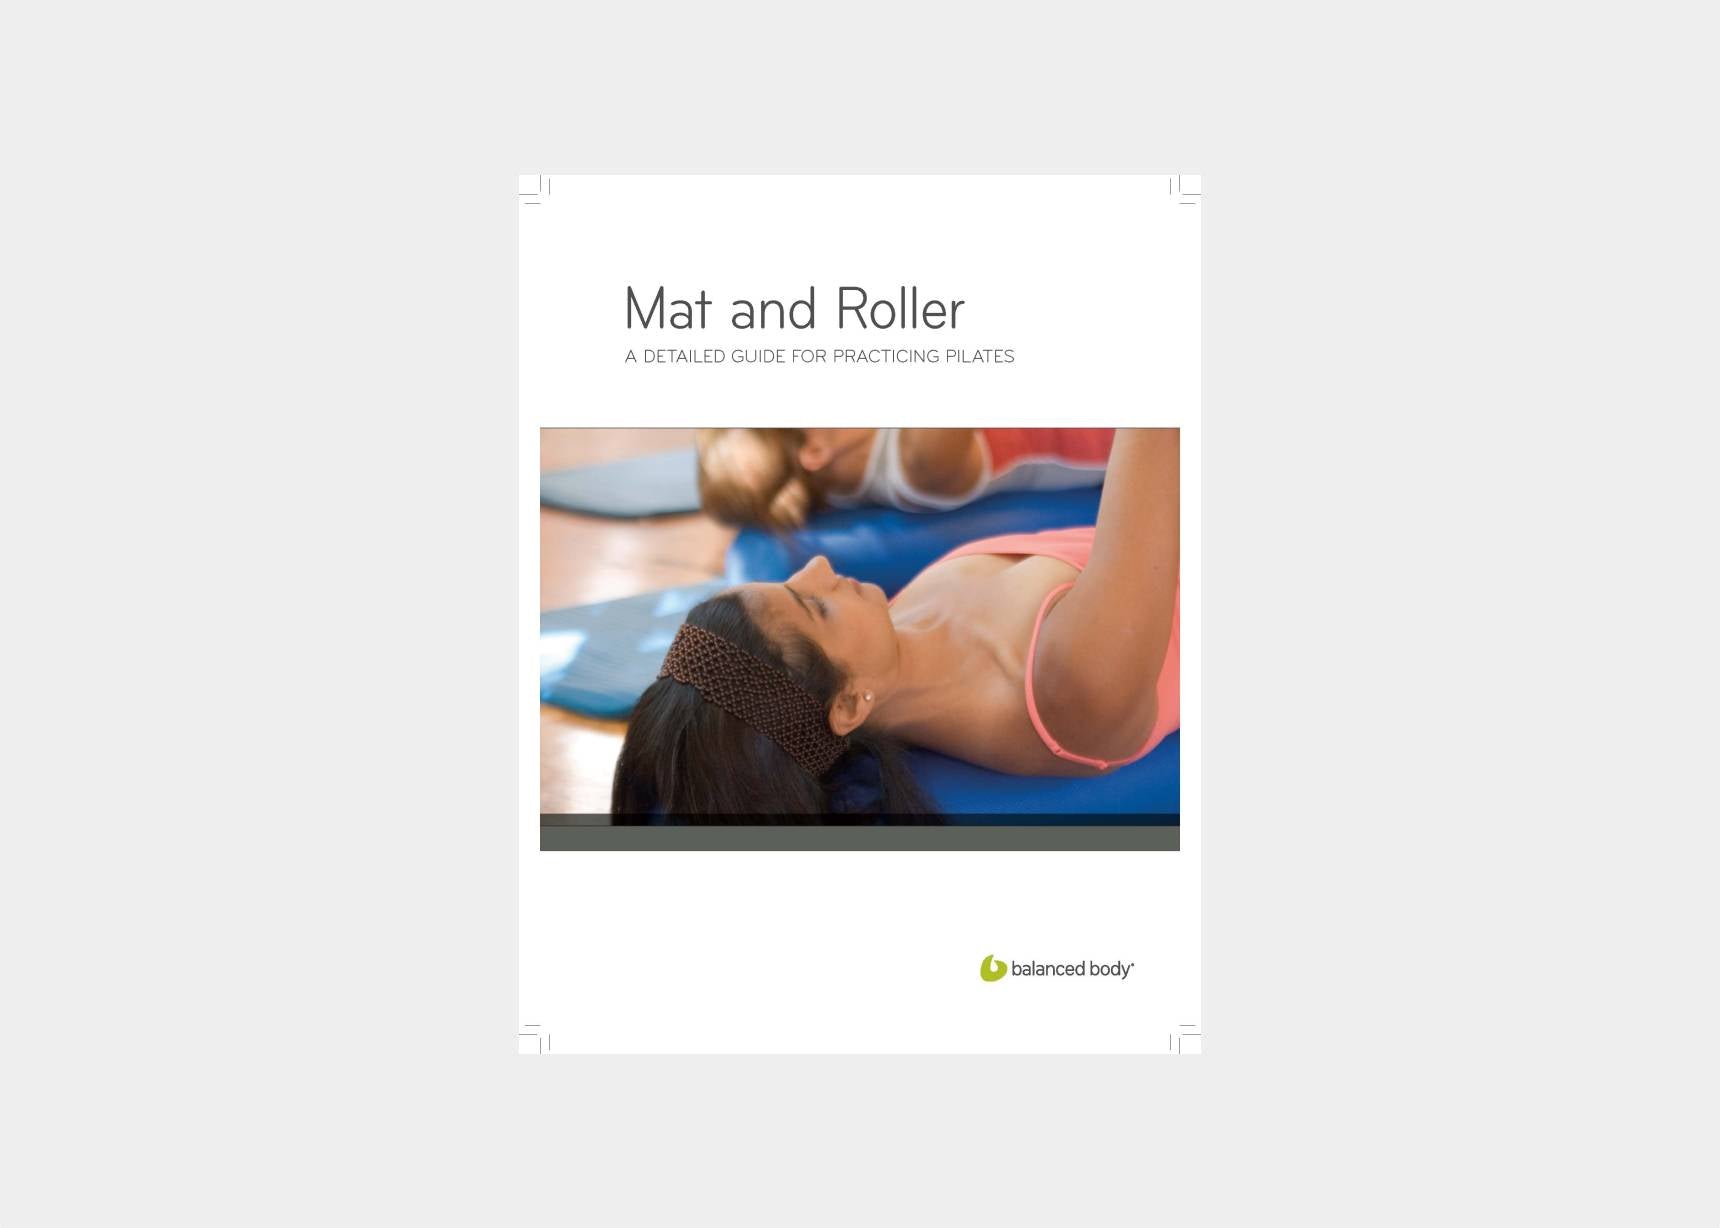 A detailed guidebook for mat and roller exercises, a treasure trove of Pilates wisdom.